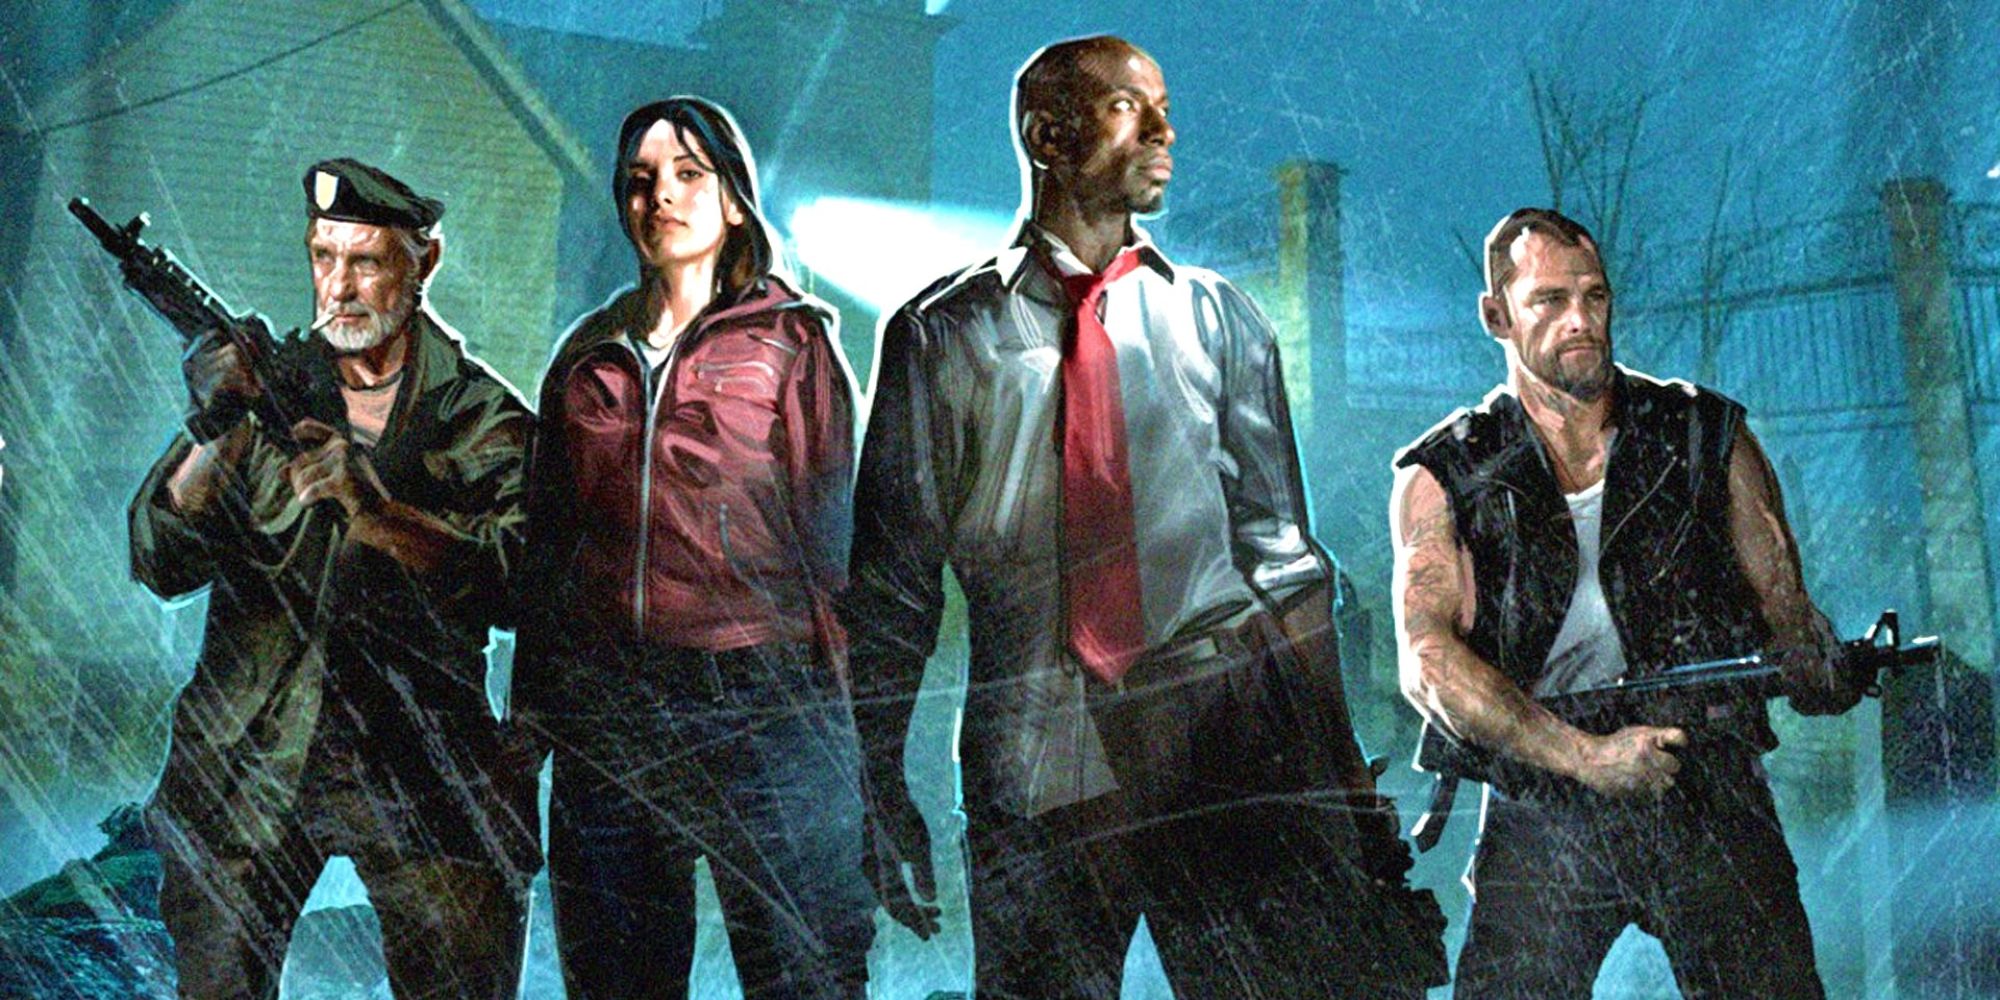 Left 4 Dead main character Bill, Zoey, Louis, and Francis stood in a line holding weapons